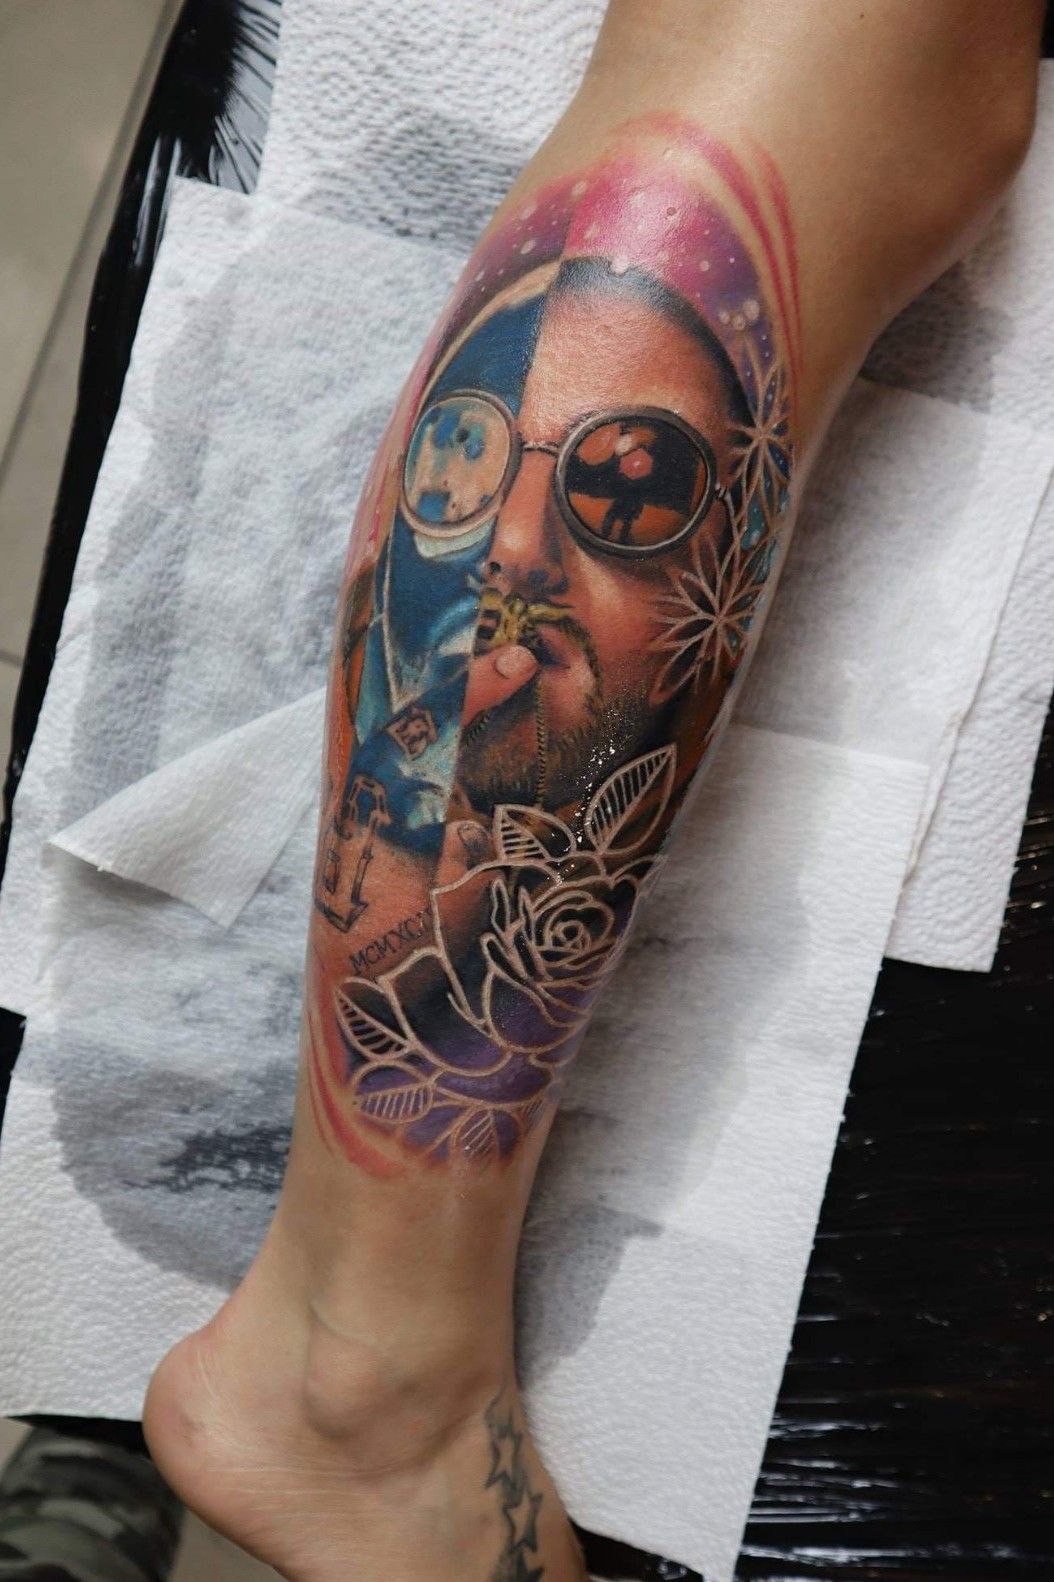 Tattoo uploaded by Crimson Tales London • Our artist